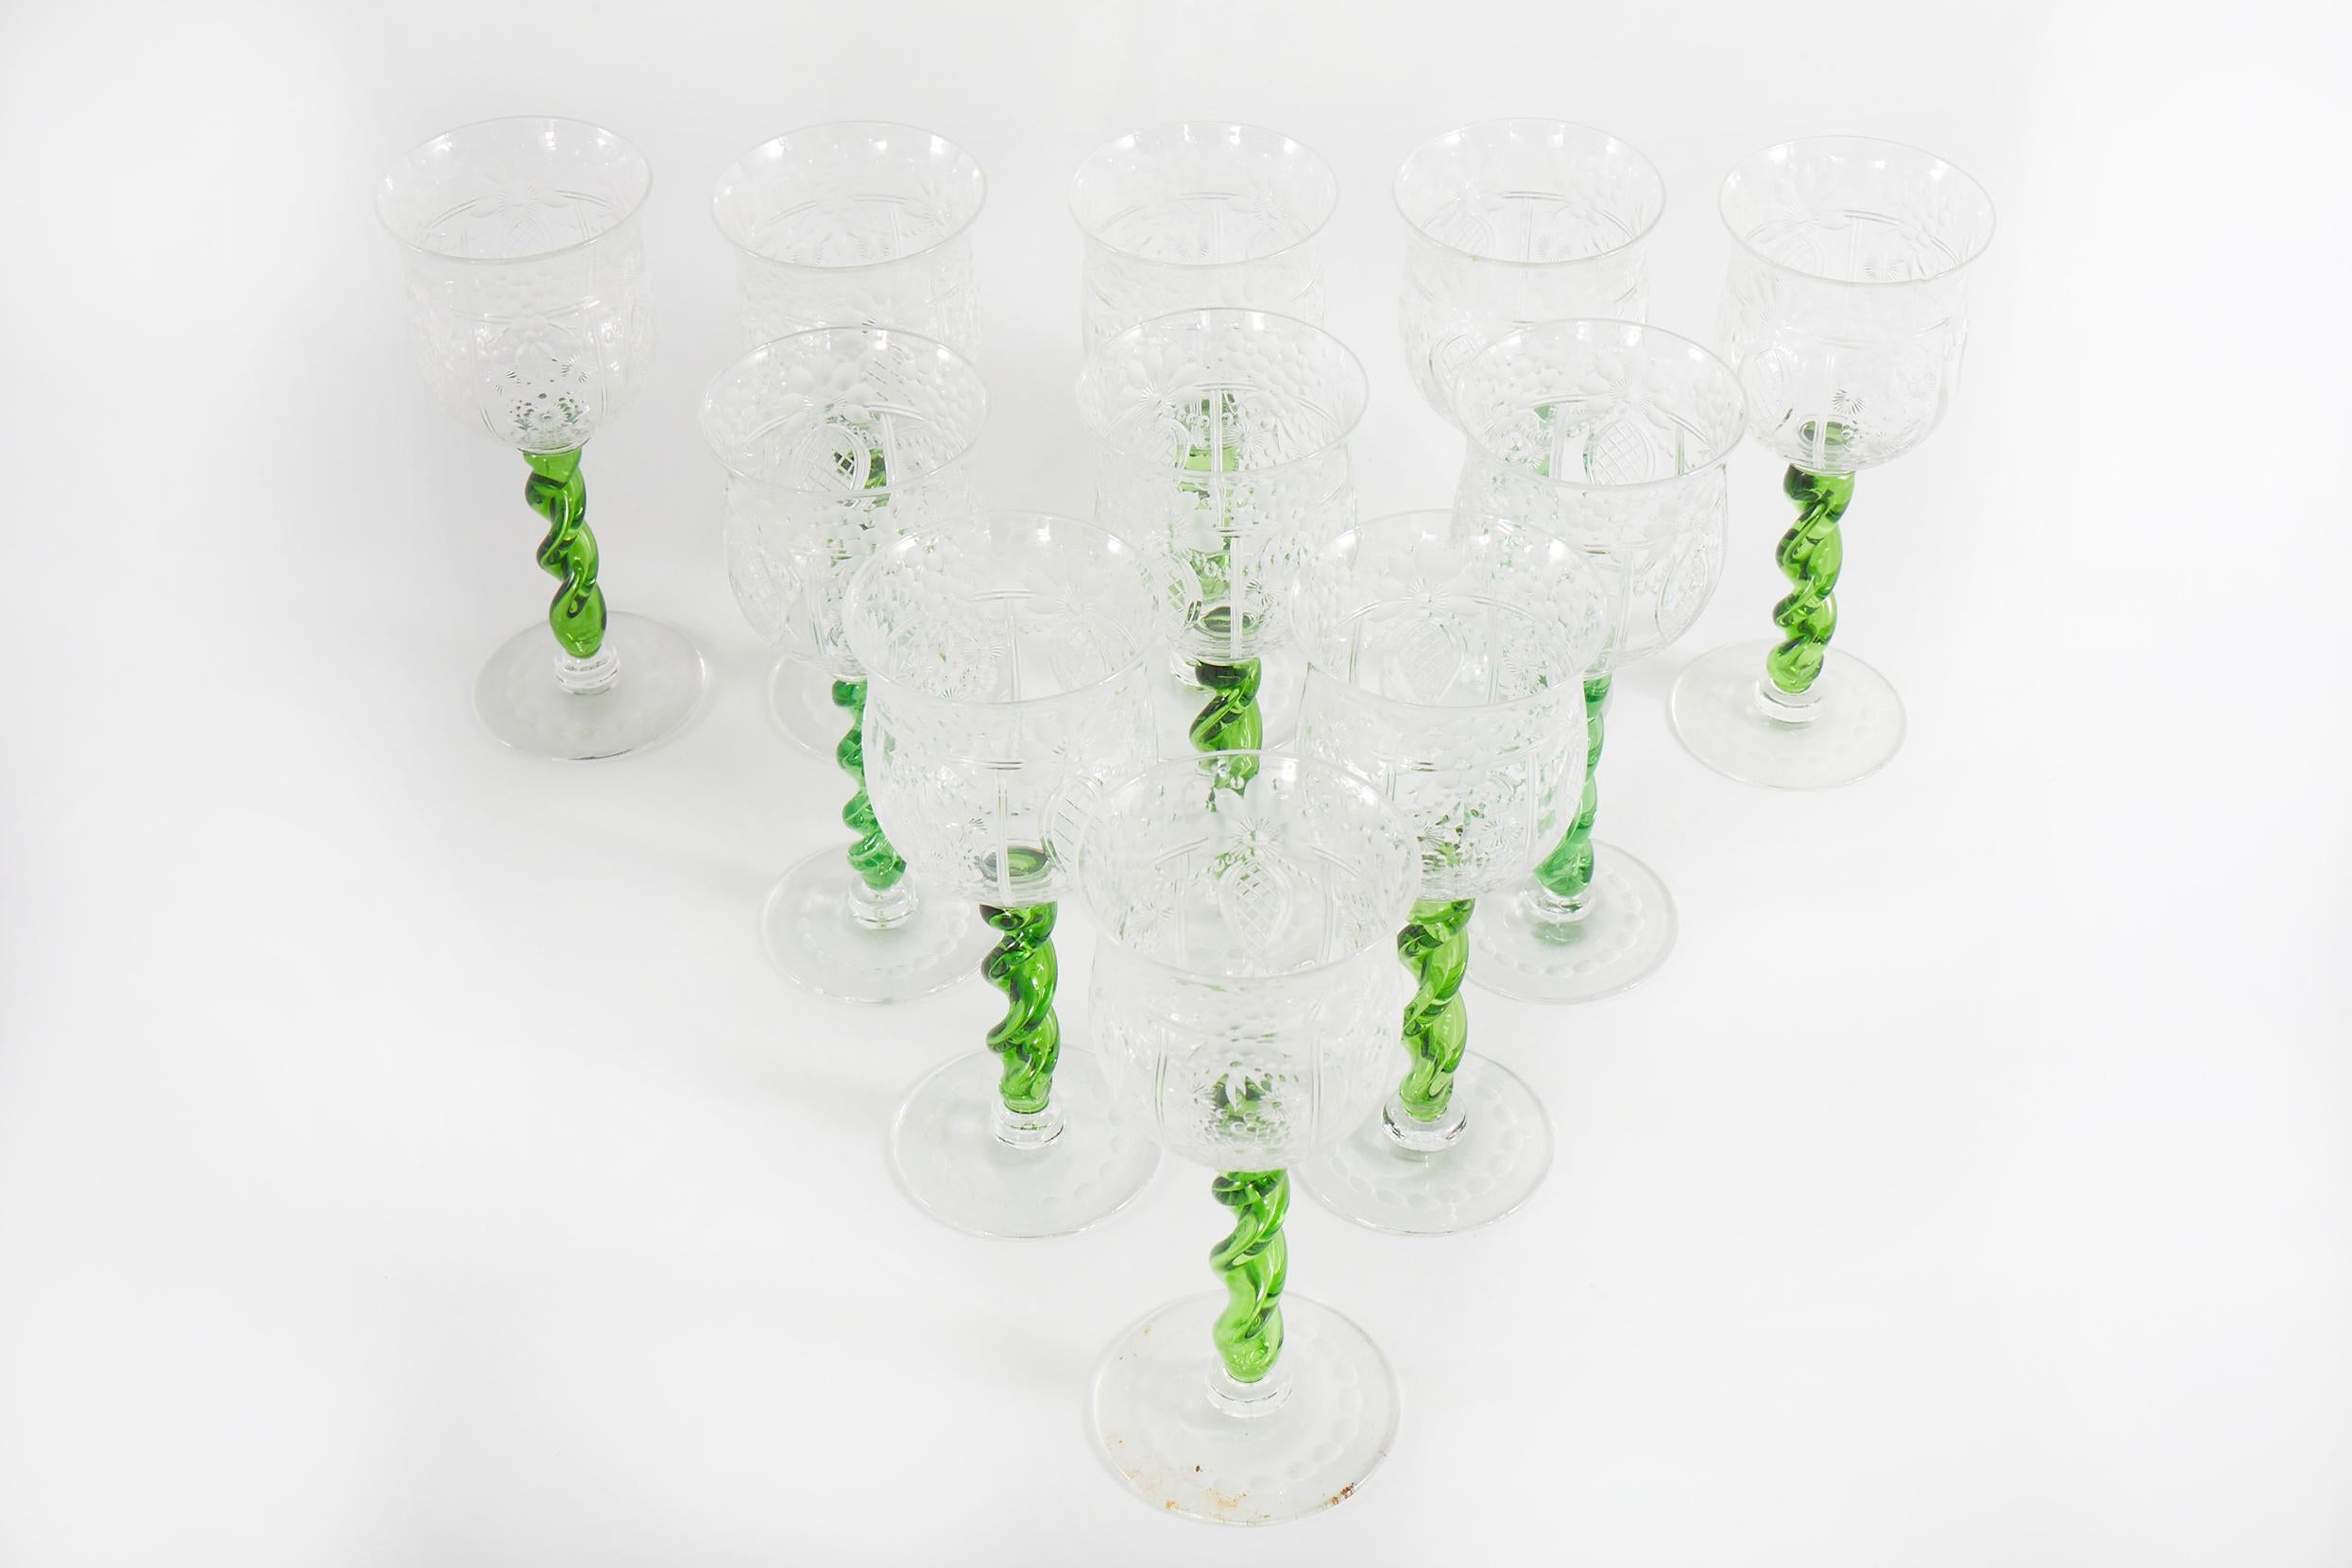 Mid 19th century English etched floral design with swirl green holding stem crystal barware / tableware wine / water glassware service for ten people. Each glass is in great condition and undersigned by the maker. Each one stand about 8 inches high